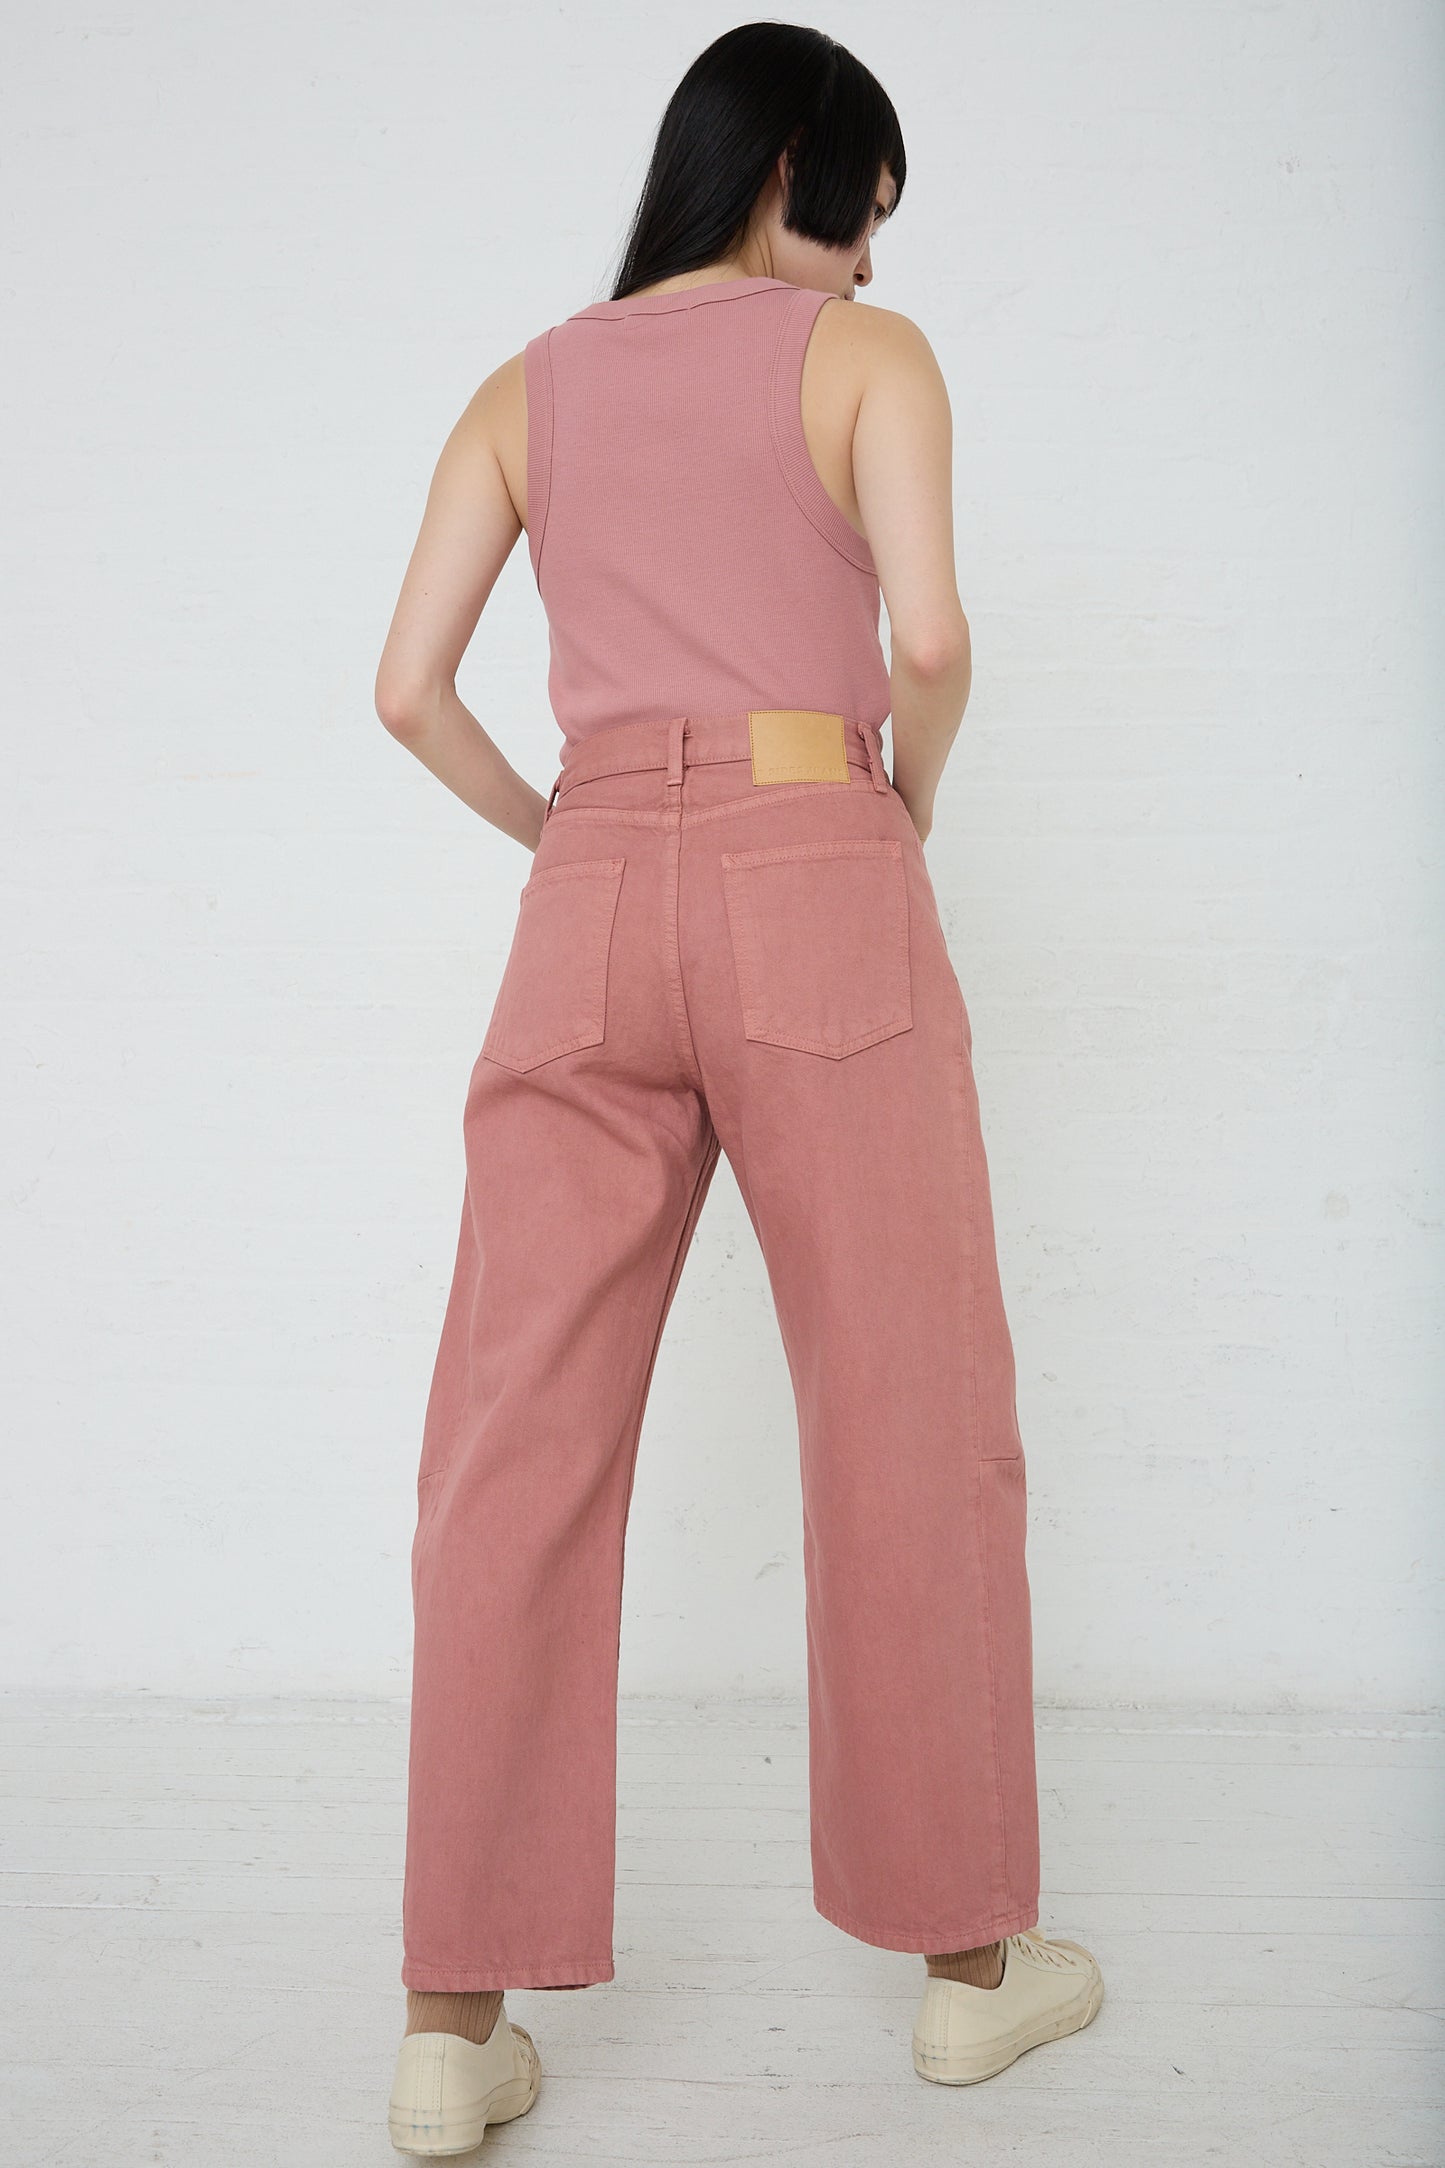 A woman seen from behind, wearing B Sides' Slim Lasso in Zinnia Overdye high-waisted denim trousers and a matching sleeveless top, standing in front of a white backdrop.